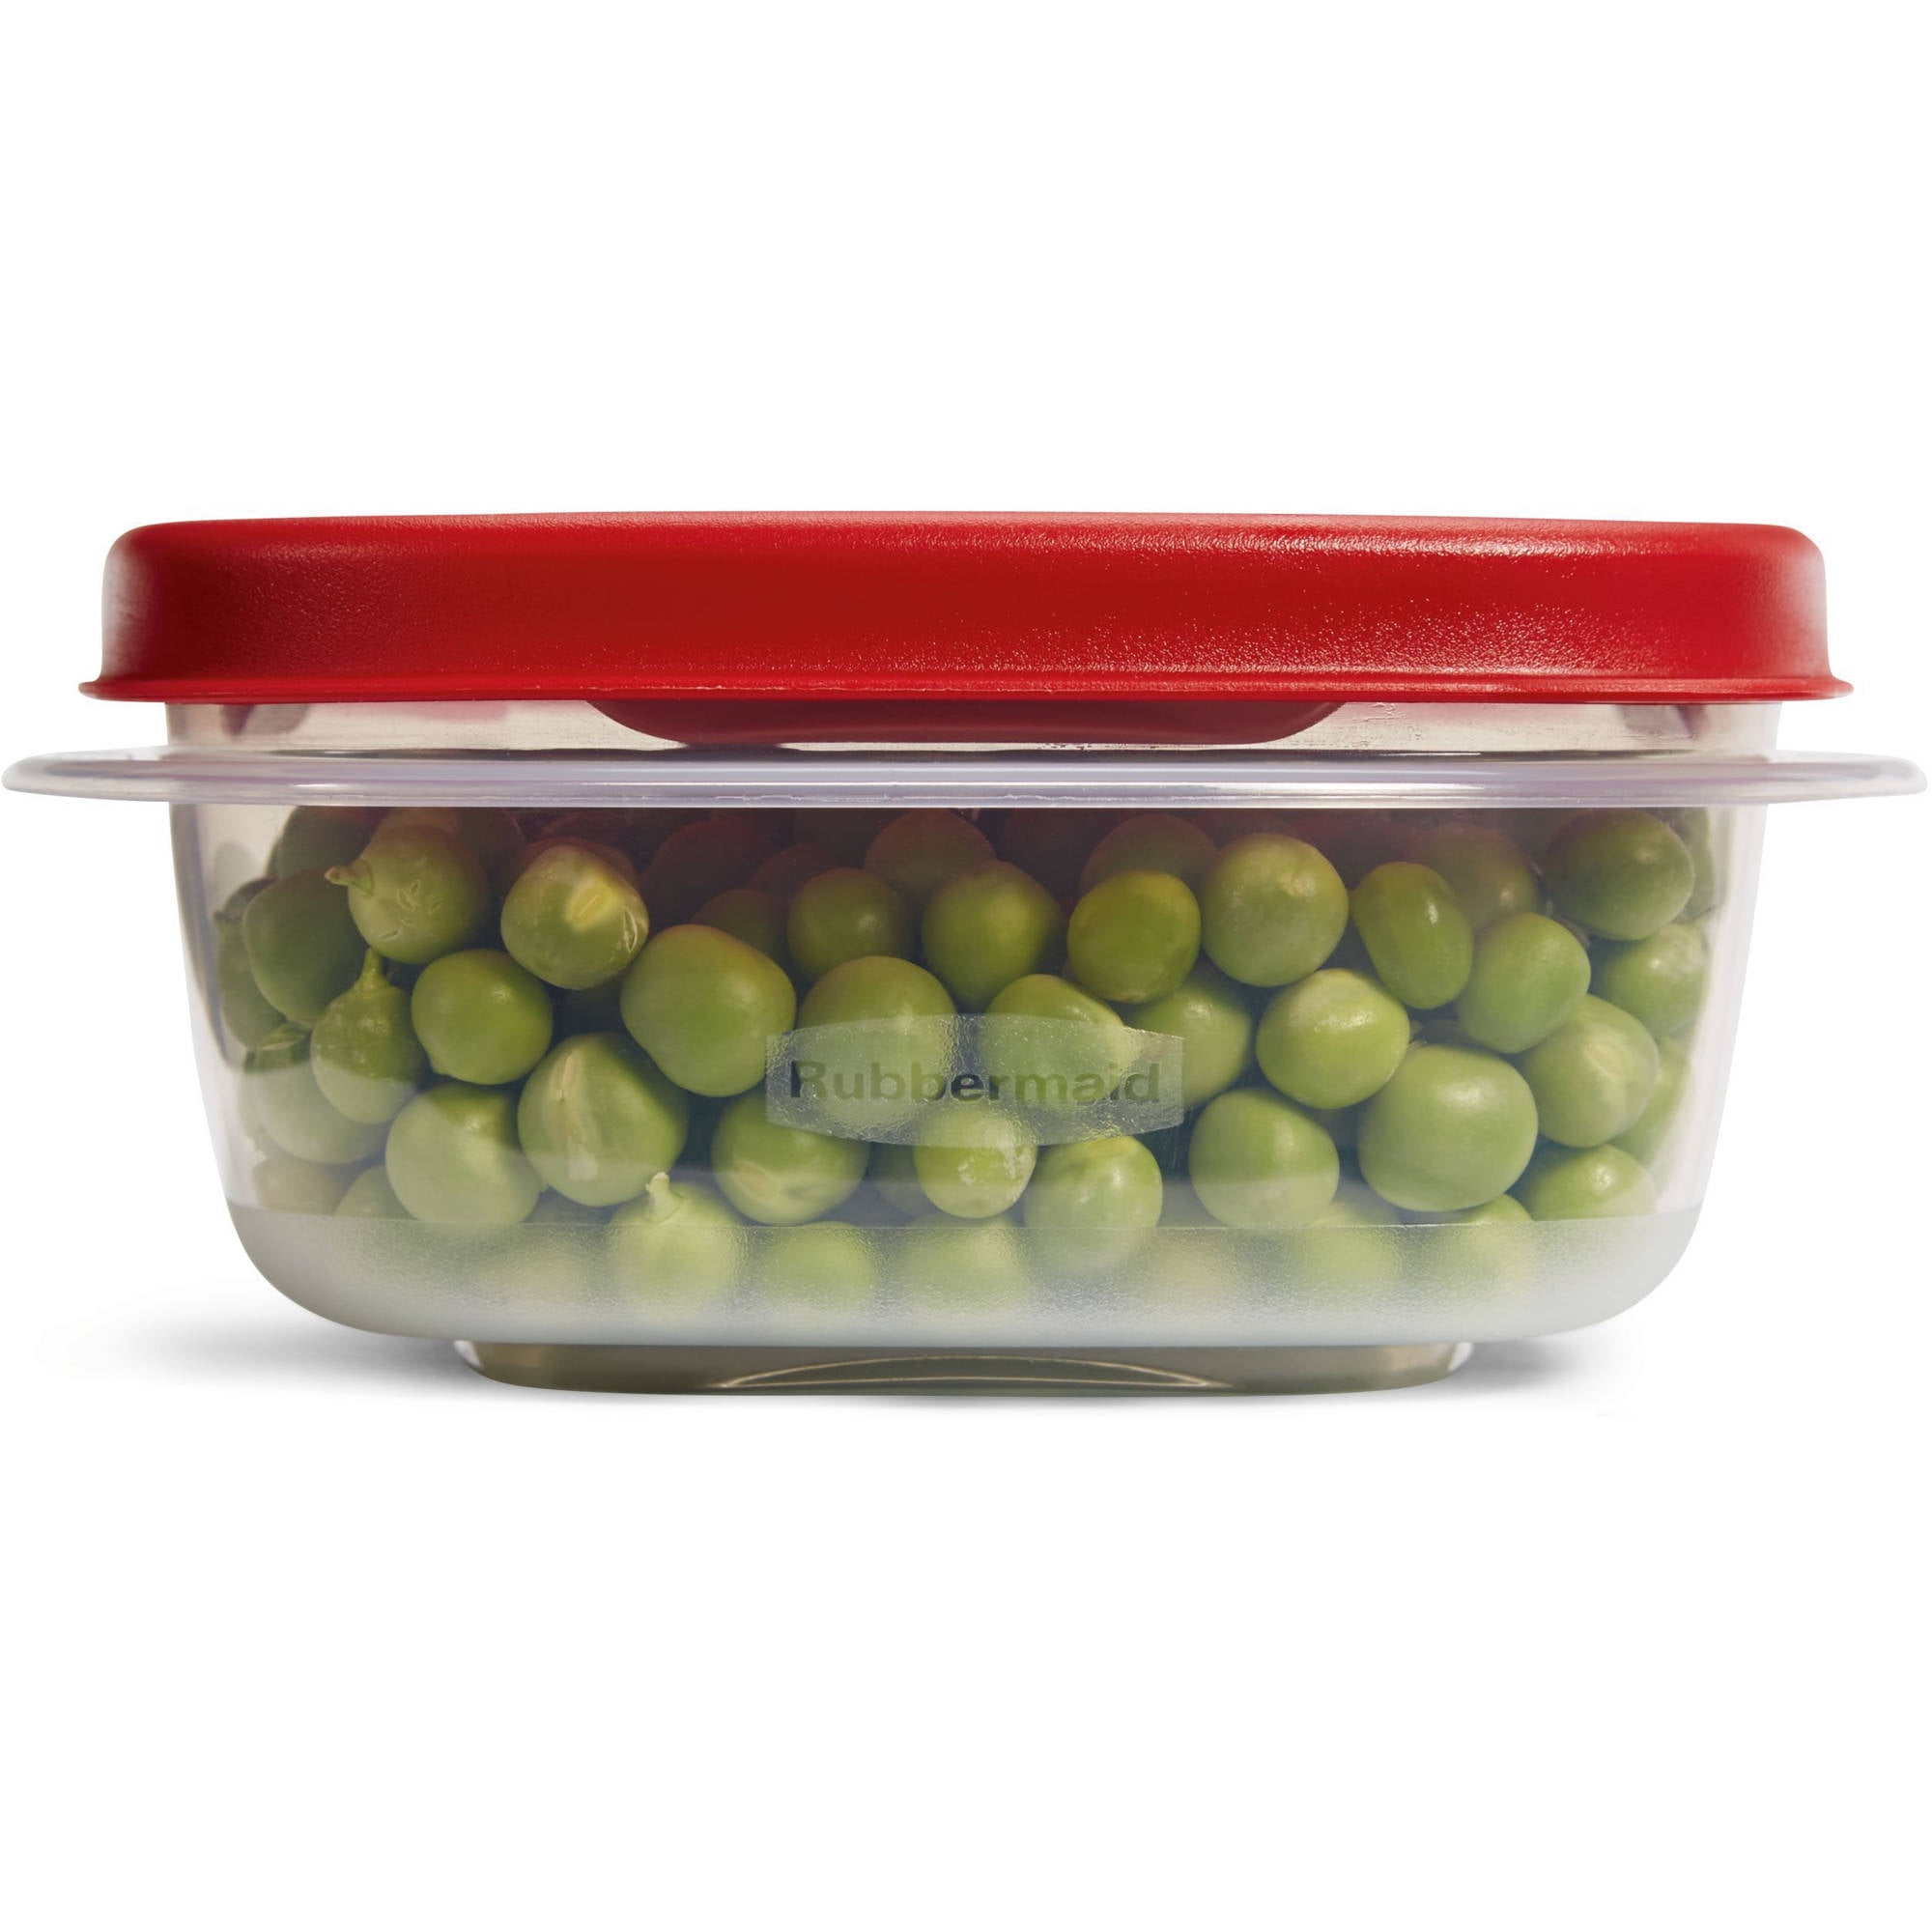 Rubbermaid food storage containers are up to 46 percent off at —today  only